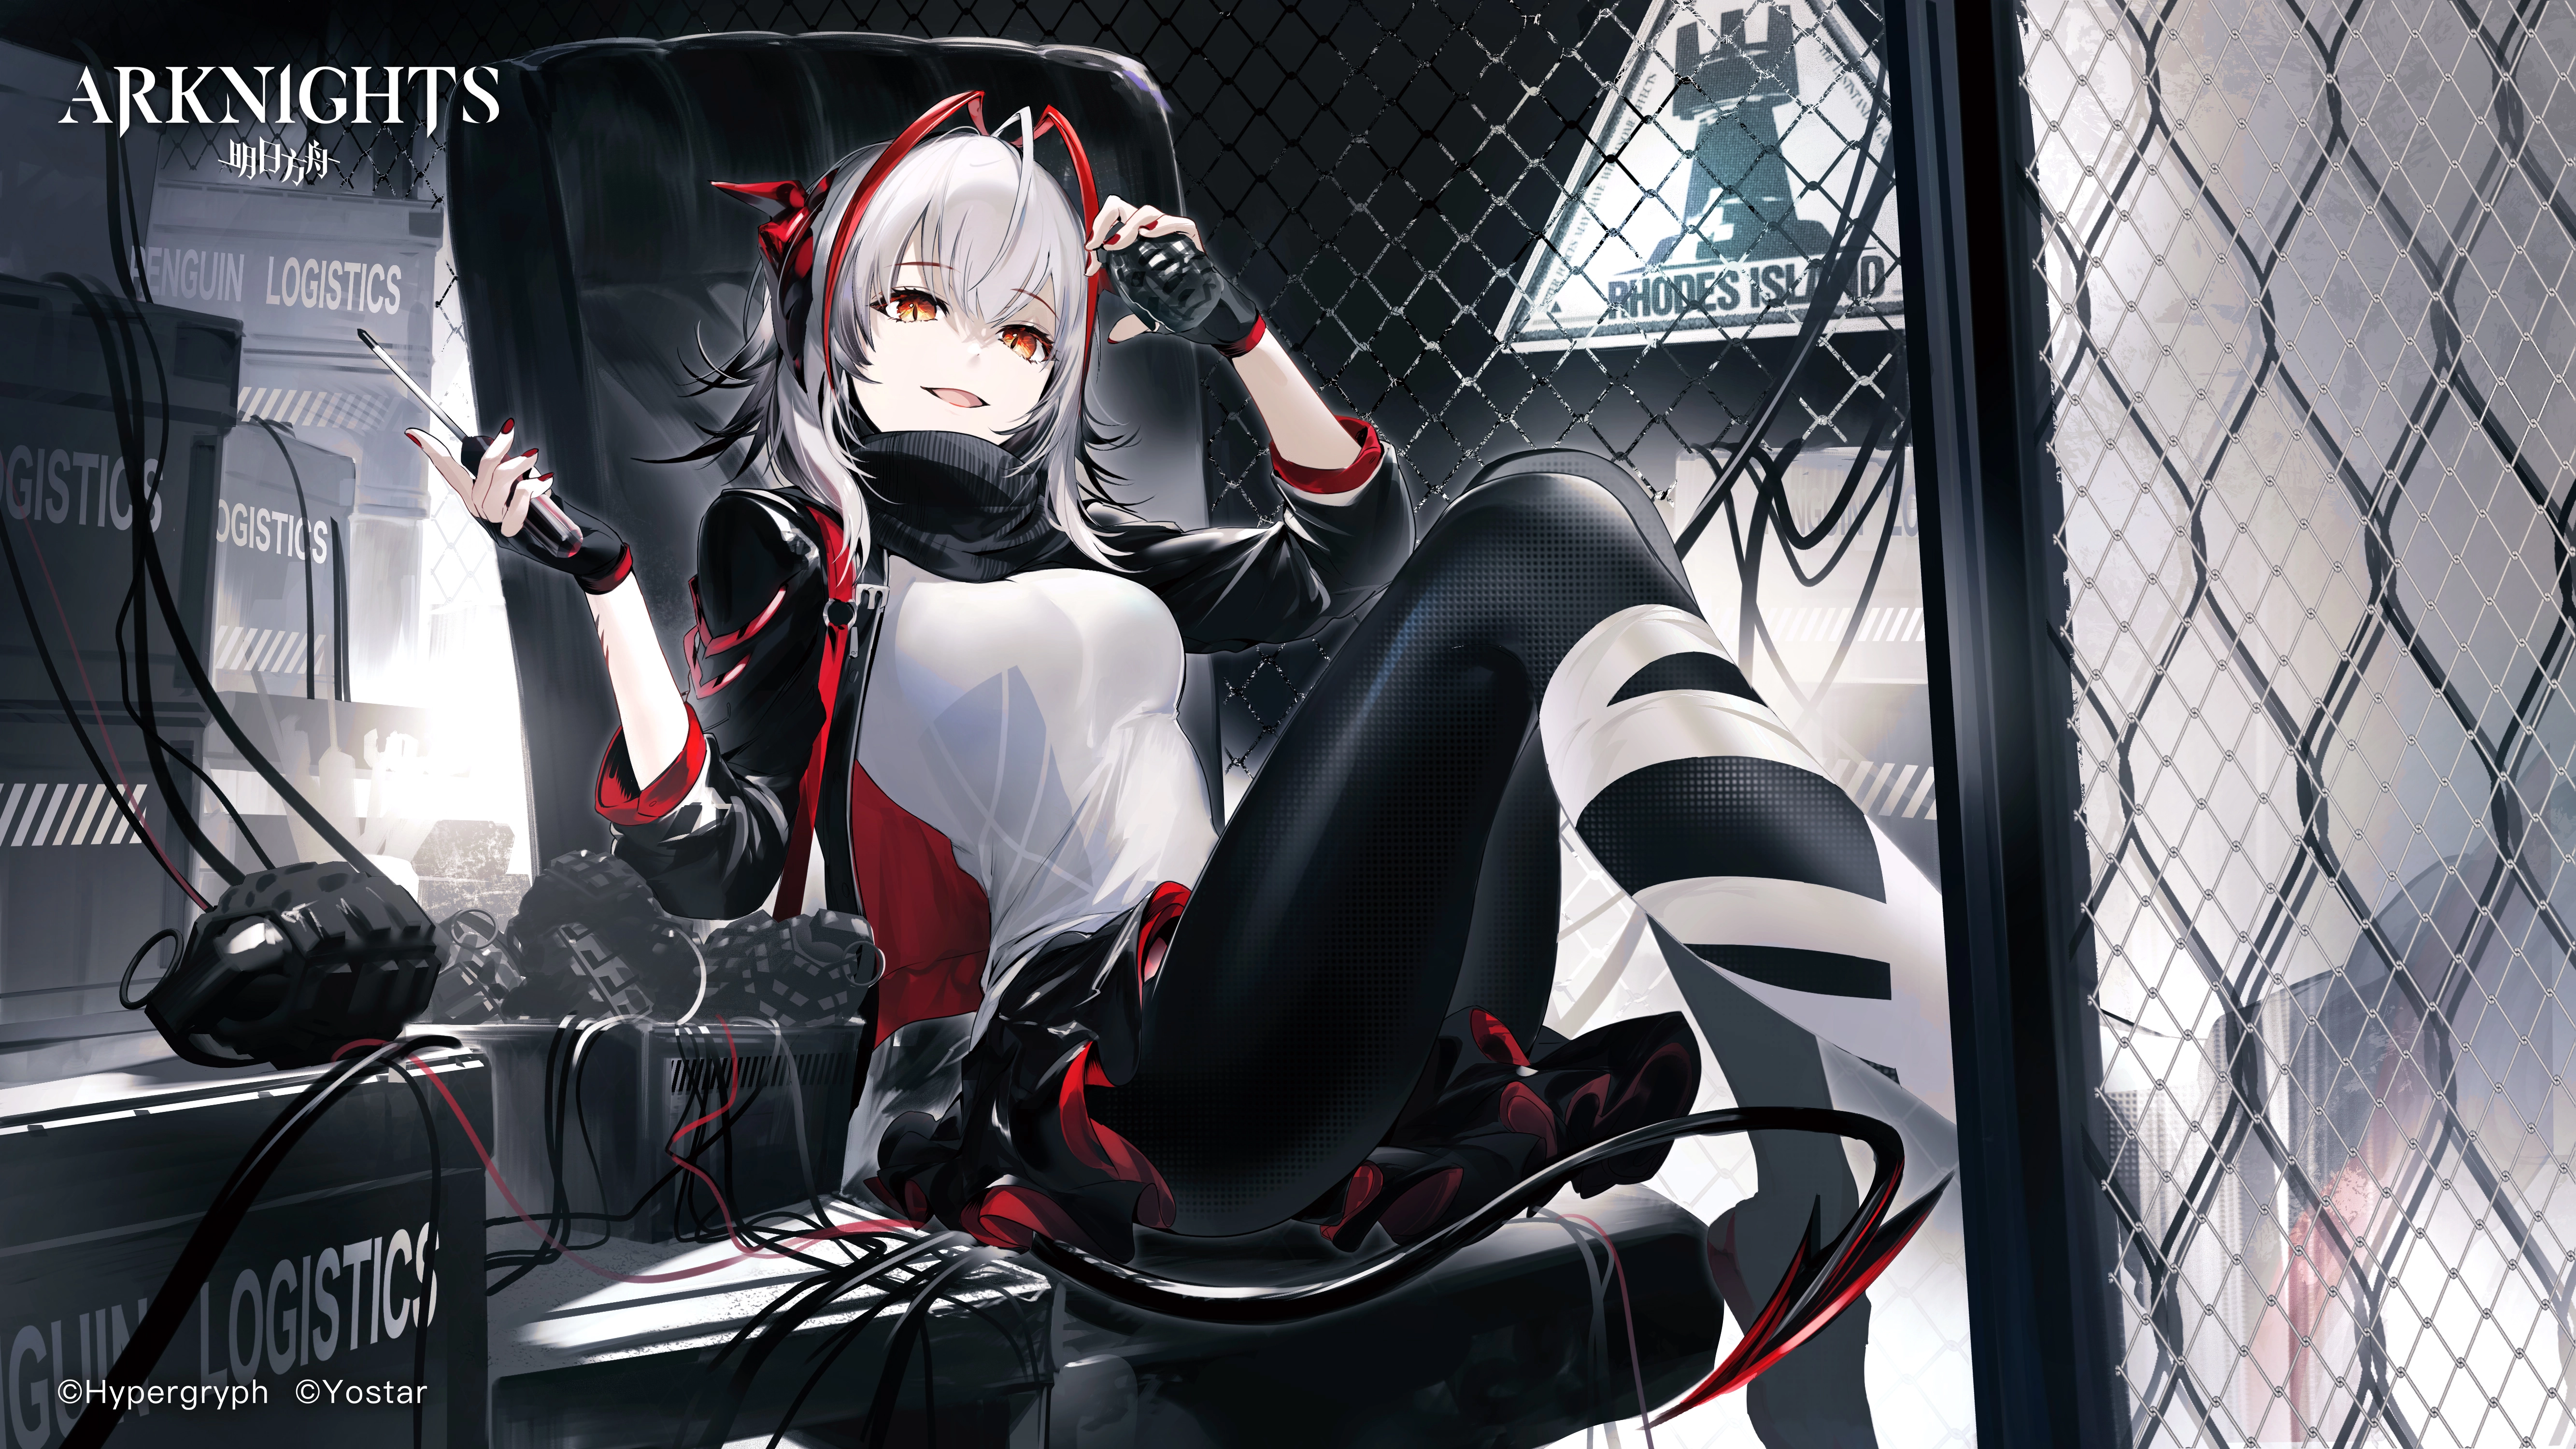 Anime 5333x3000 anime video game characters video games Arknights W (Arknights) gray hair horns red eyes screwdriver grenades white shirt Rhodes Island (Arknights) red nails tail skirt anime girls Hoojiro women